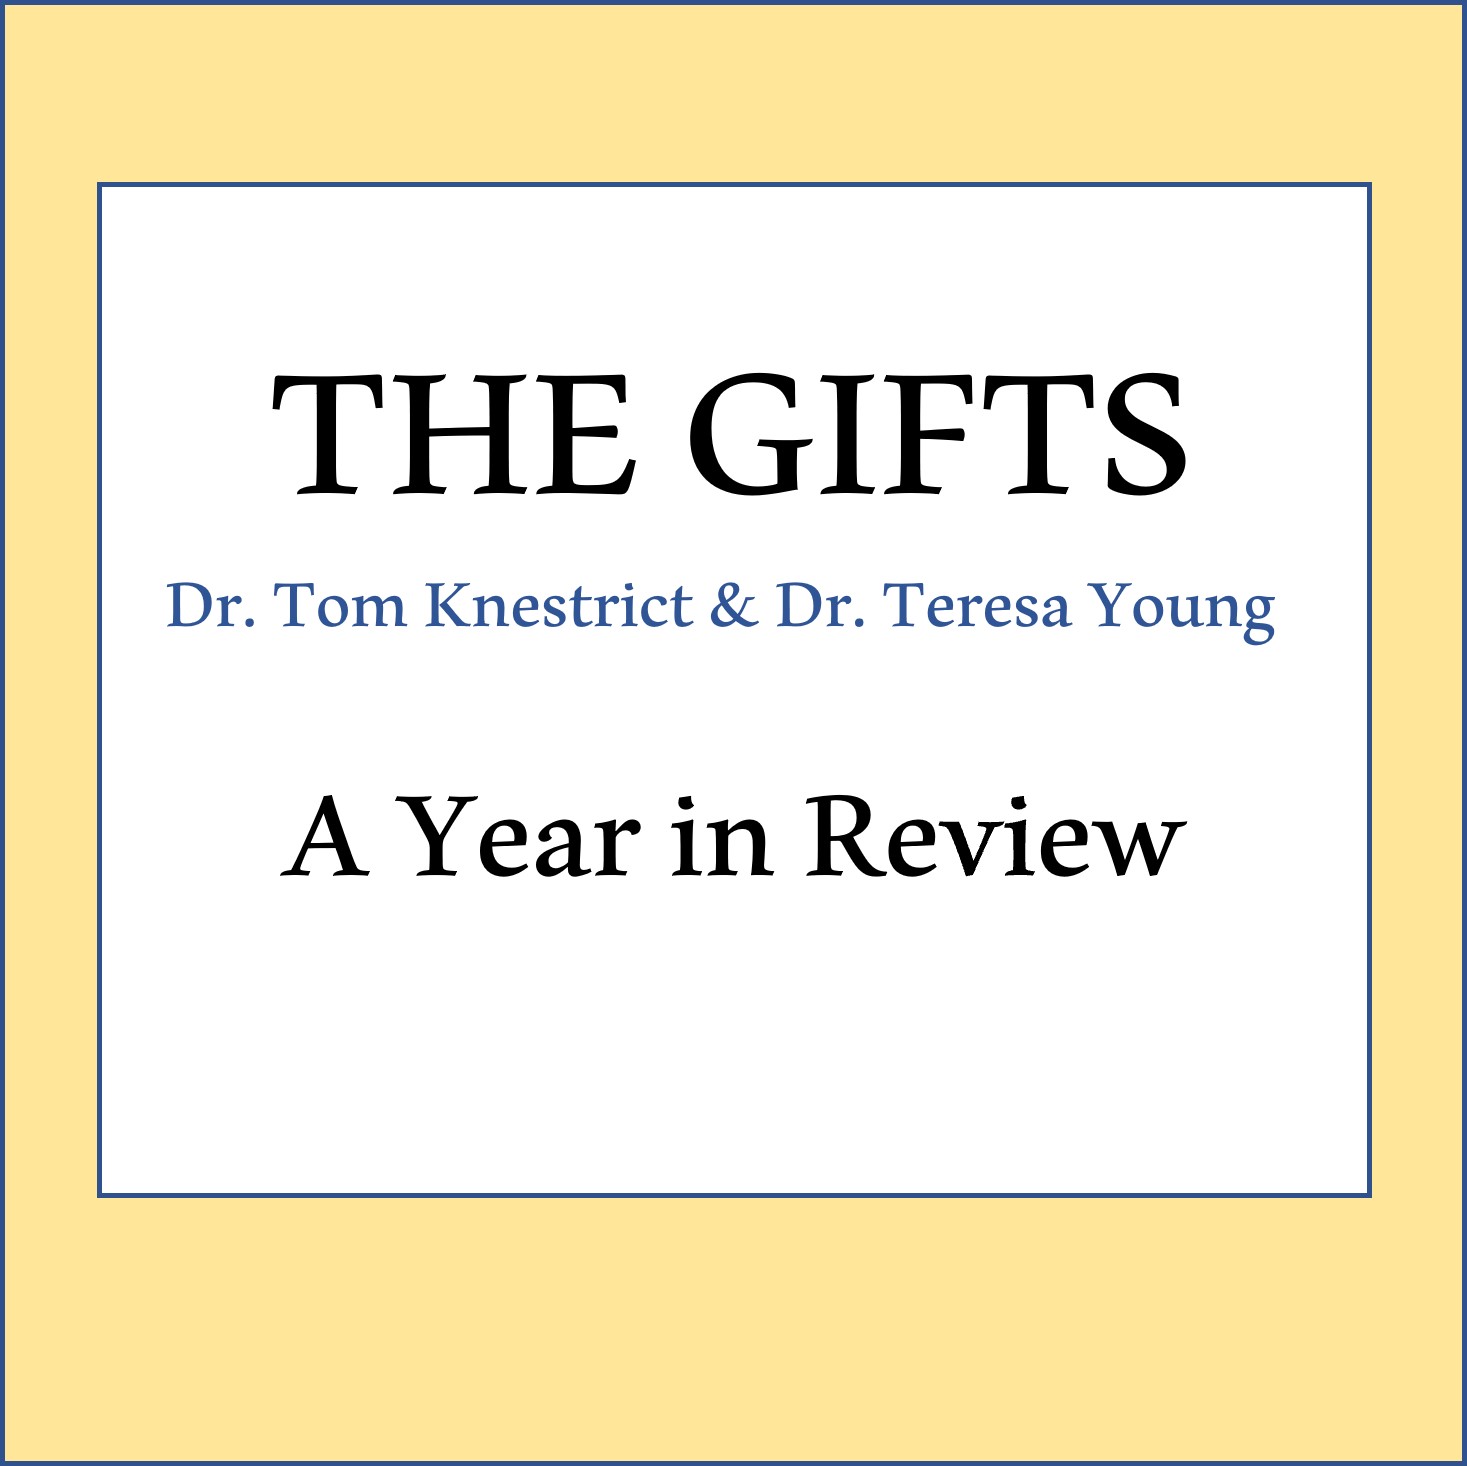 The gifts A Year in Review